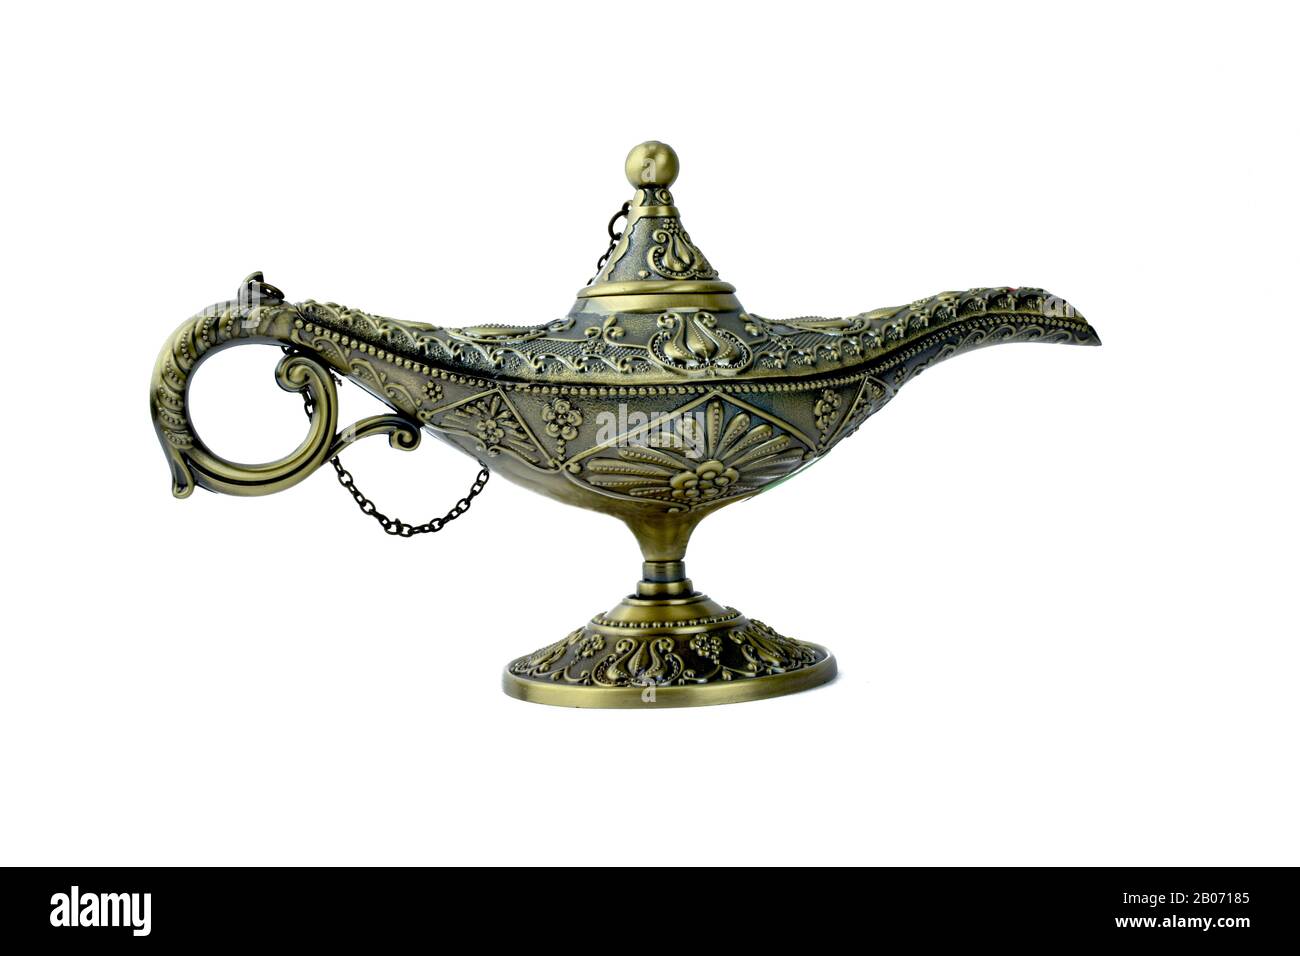 Magical genie lamp of aladdin,a antique golden colored lamp displayed on a  white background Stock Photo - Alamy